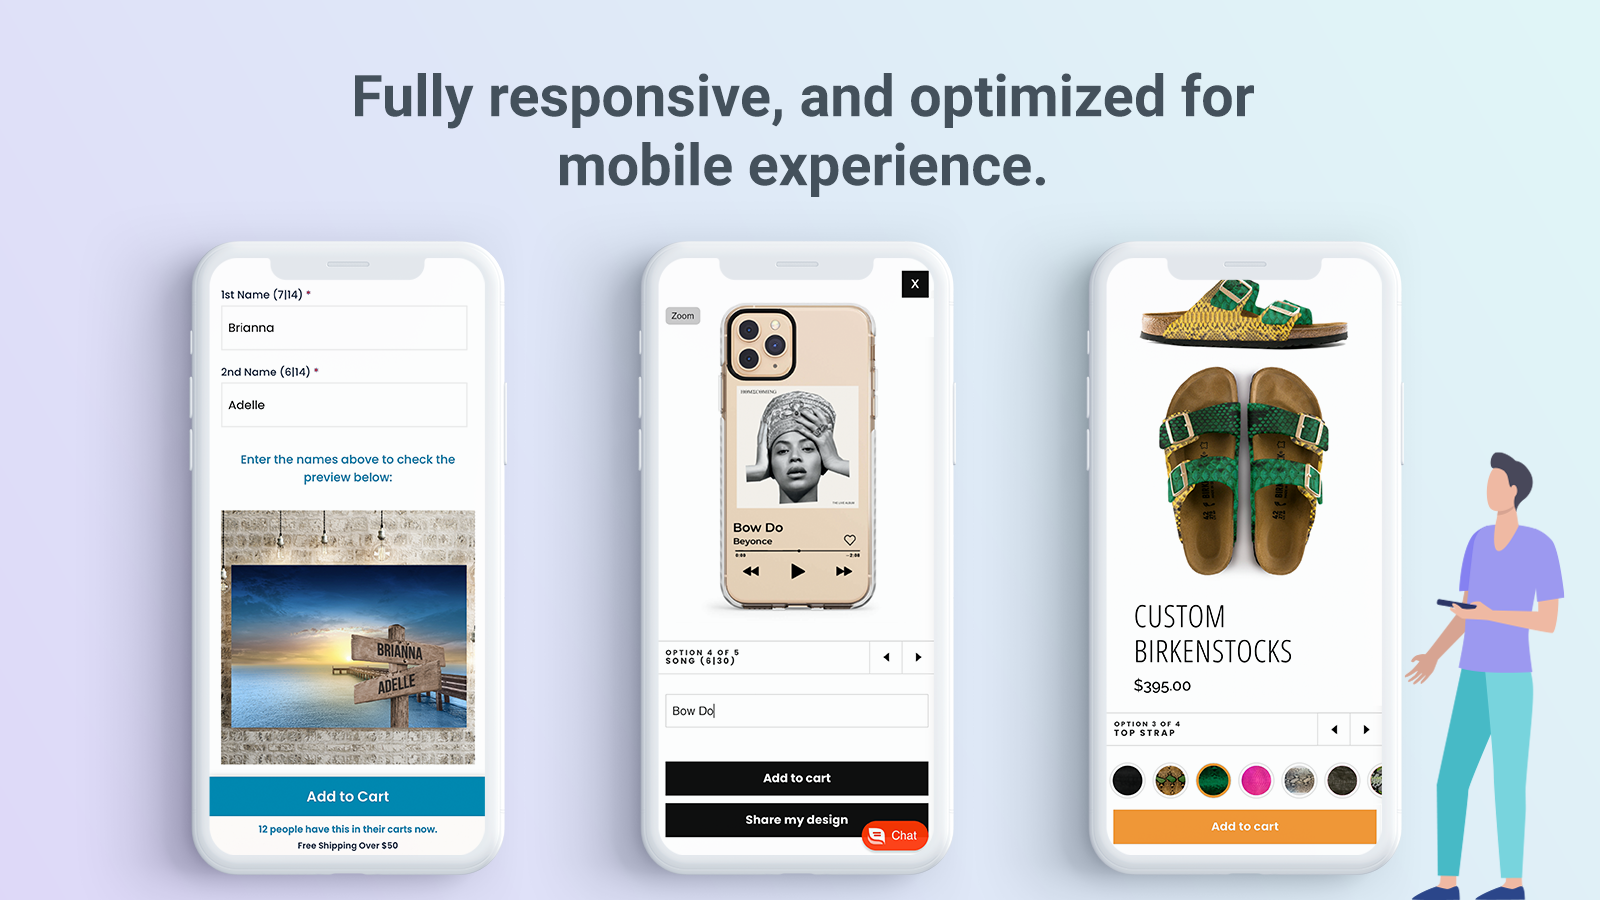 Fully responsive, and optimized for mobile experience.